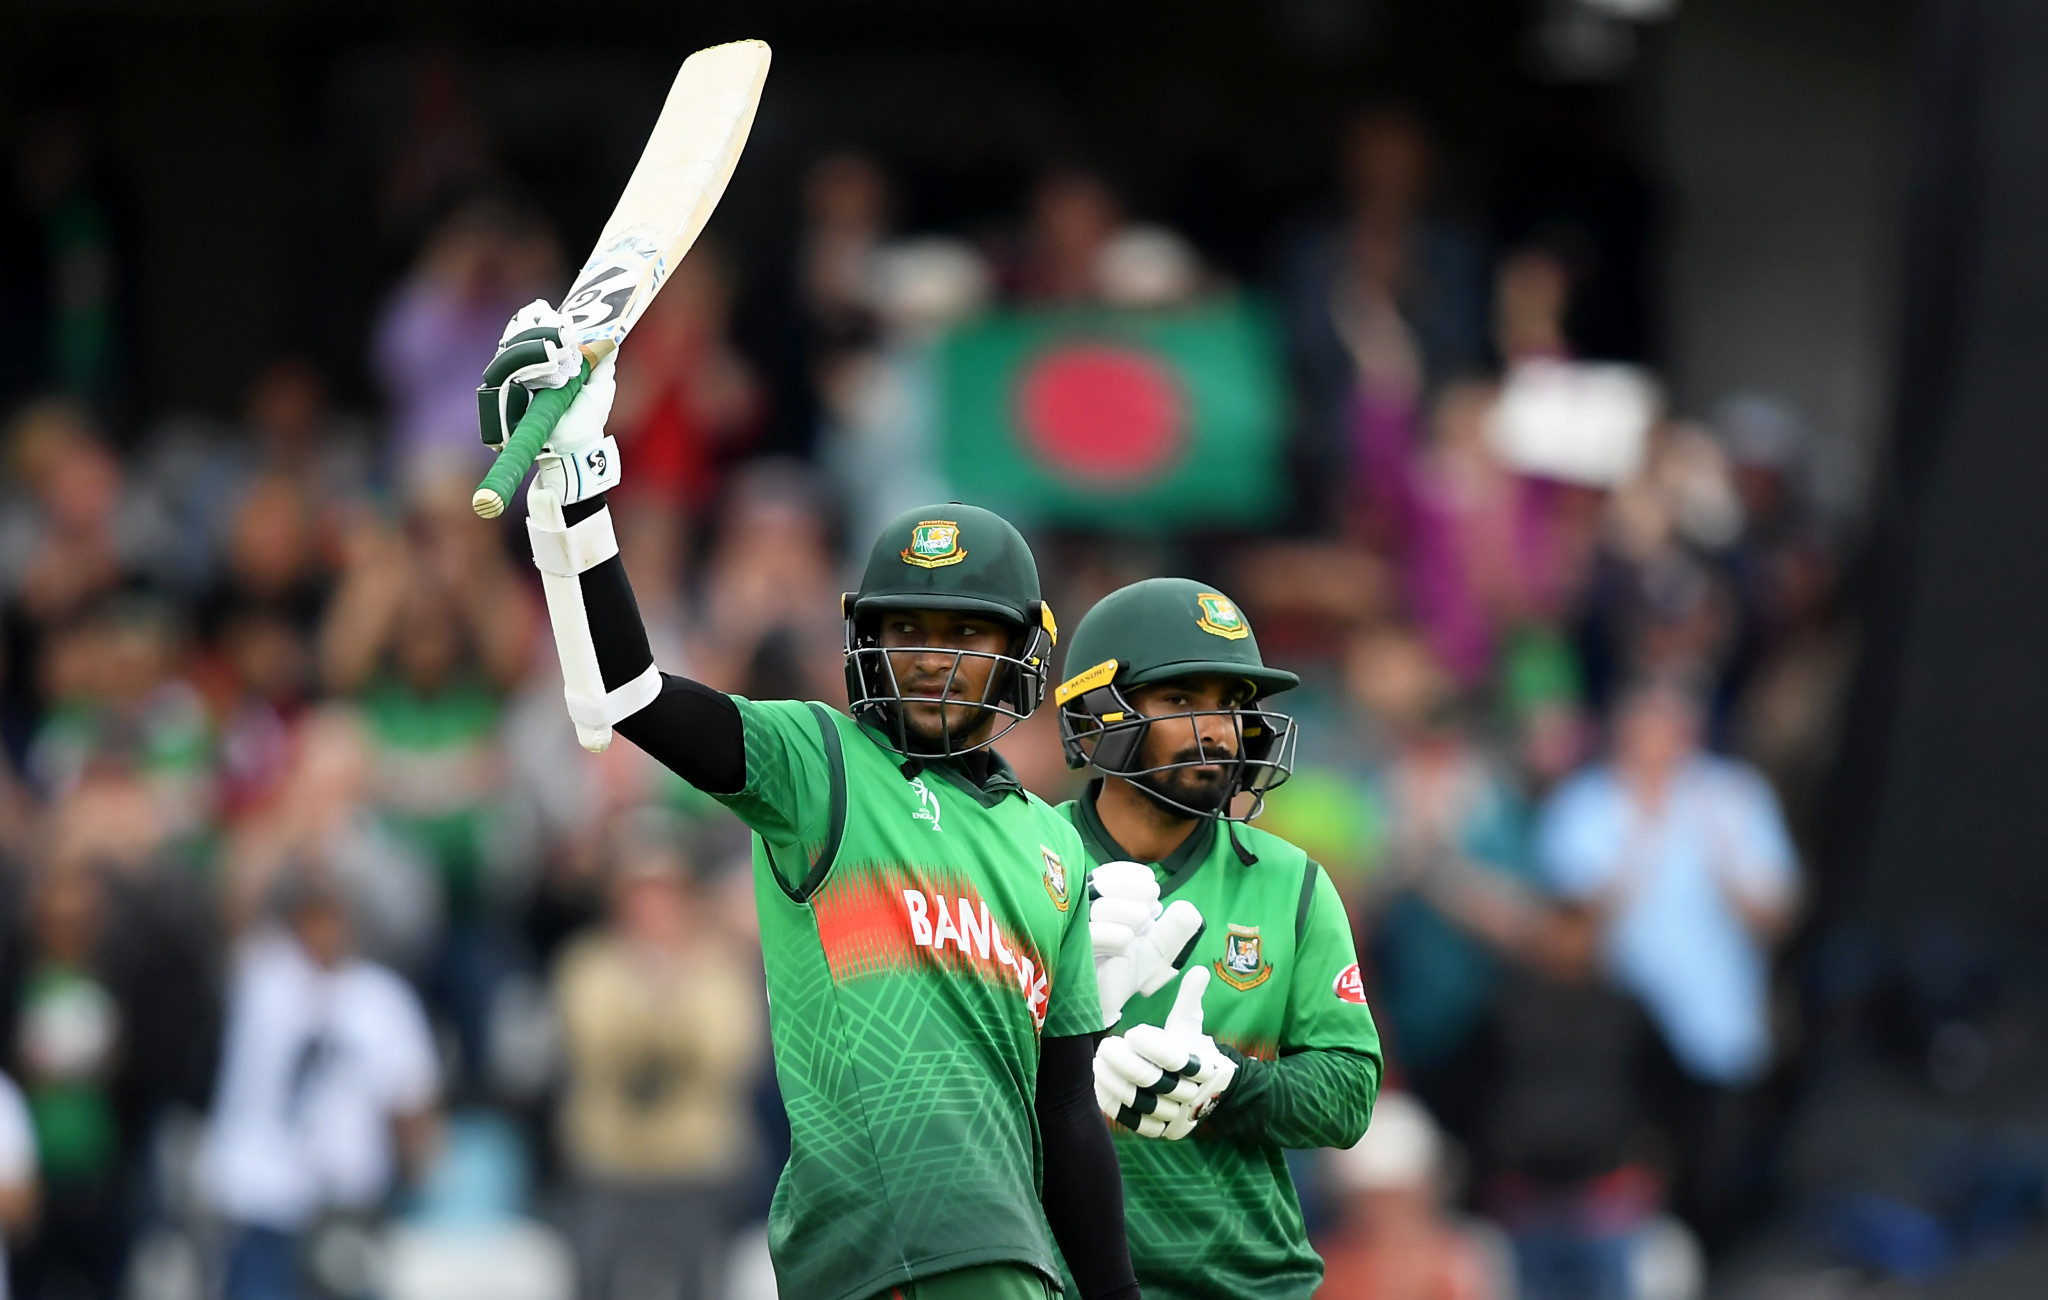 Shakib Al Hasan and Liton Das enjoyed an unbeaten partnership of 189 for the fourth wicket ©Getty Images